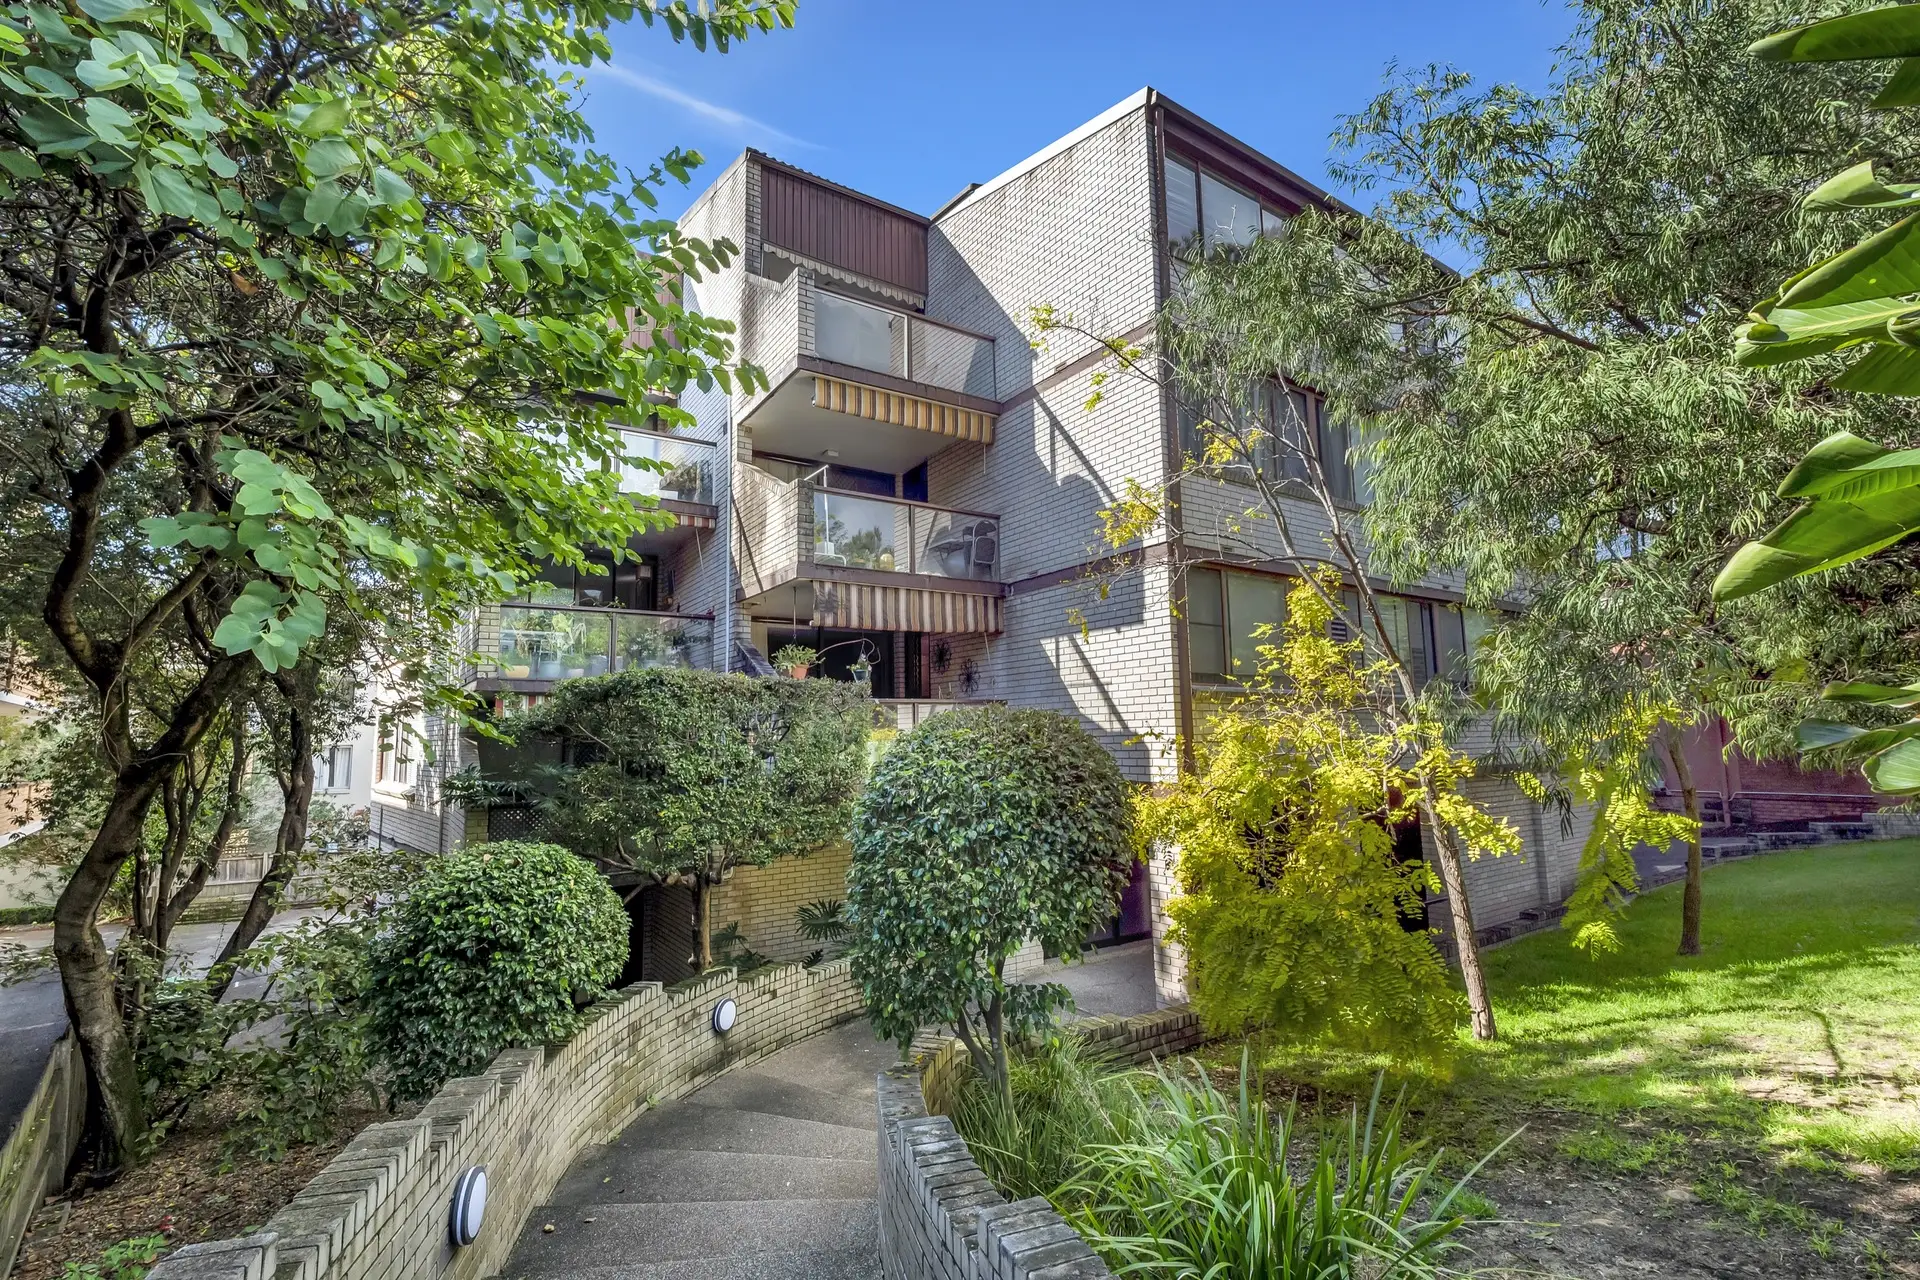 8/429-433 Old South Head Road, Rose Bay Sold by Bradfield Badgerfox - image 1